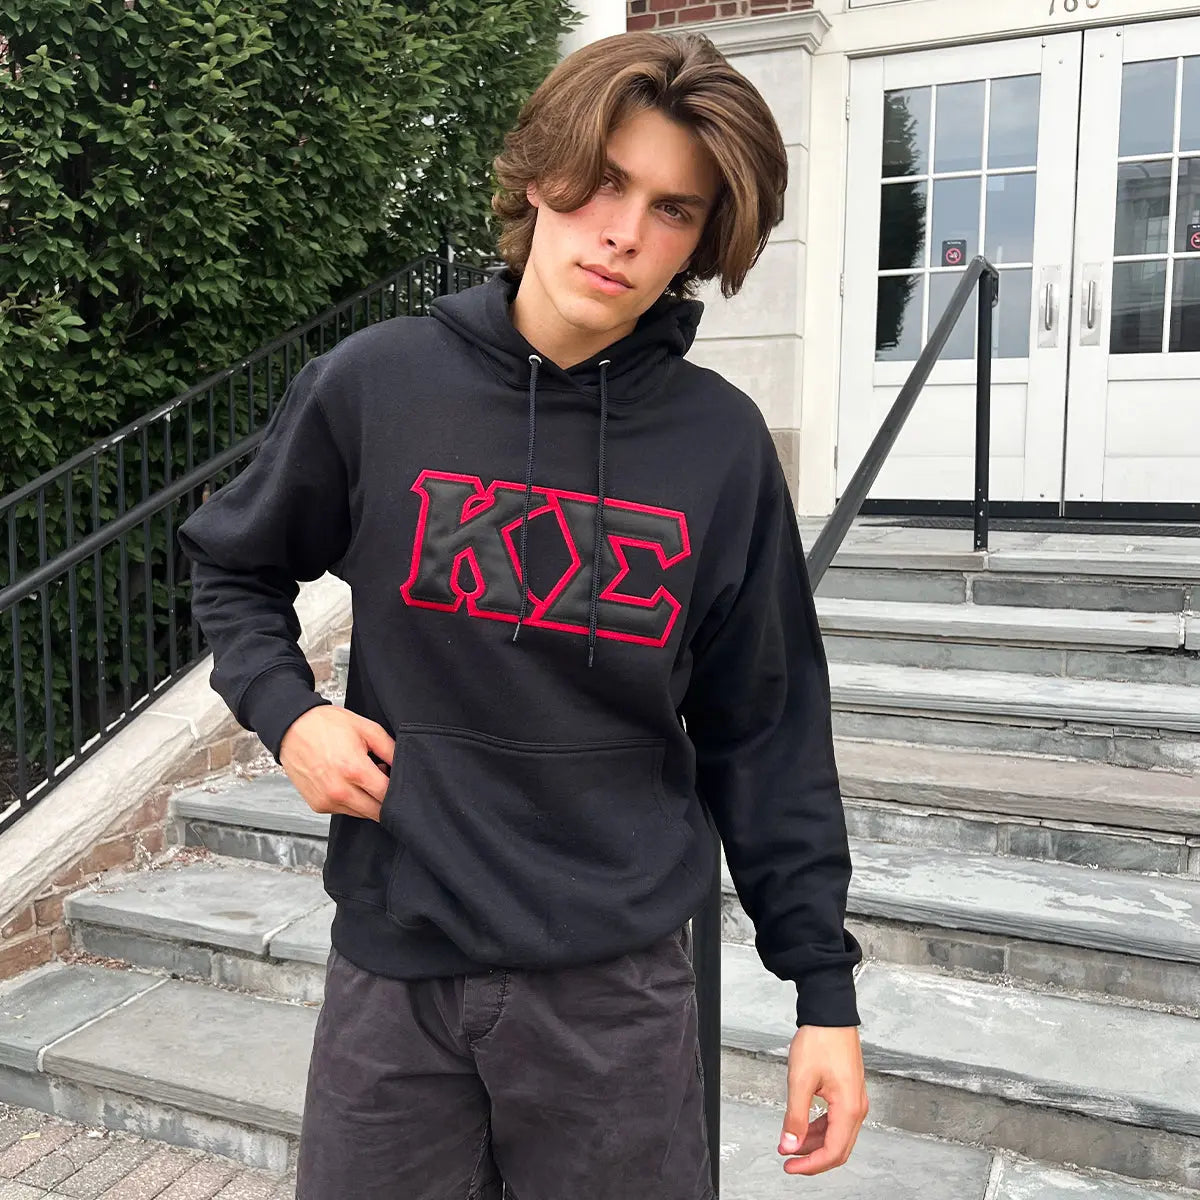 Kappa Sig Black Hoodie with Black Sewn On Letters - Kappa Sigma Official Store